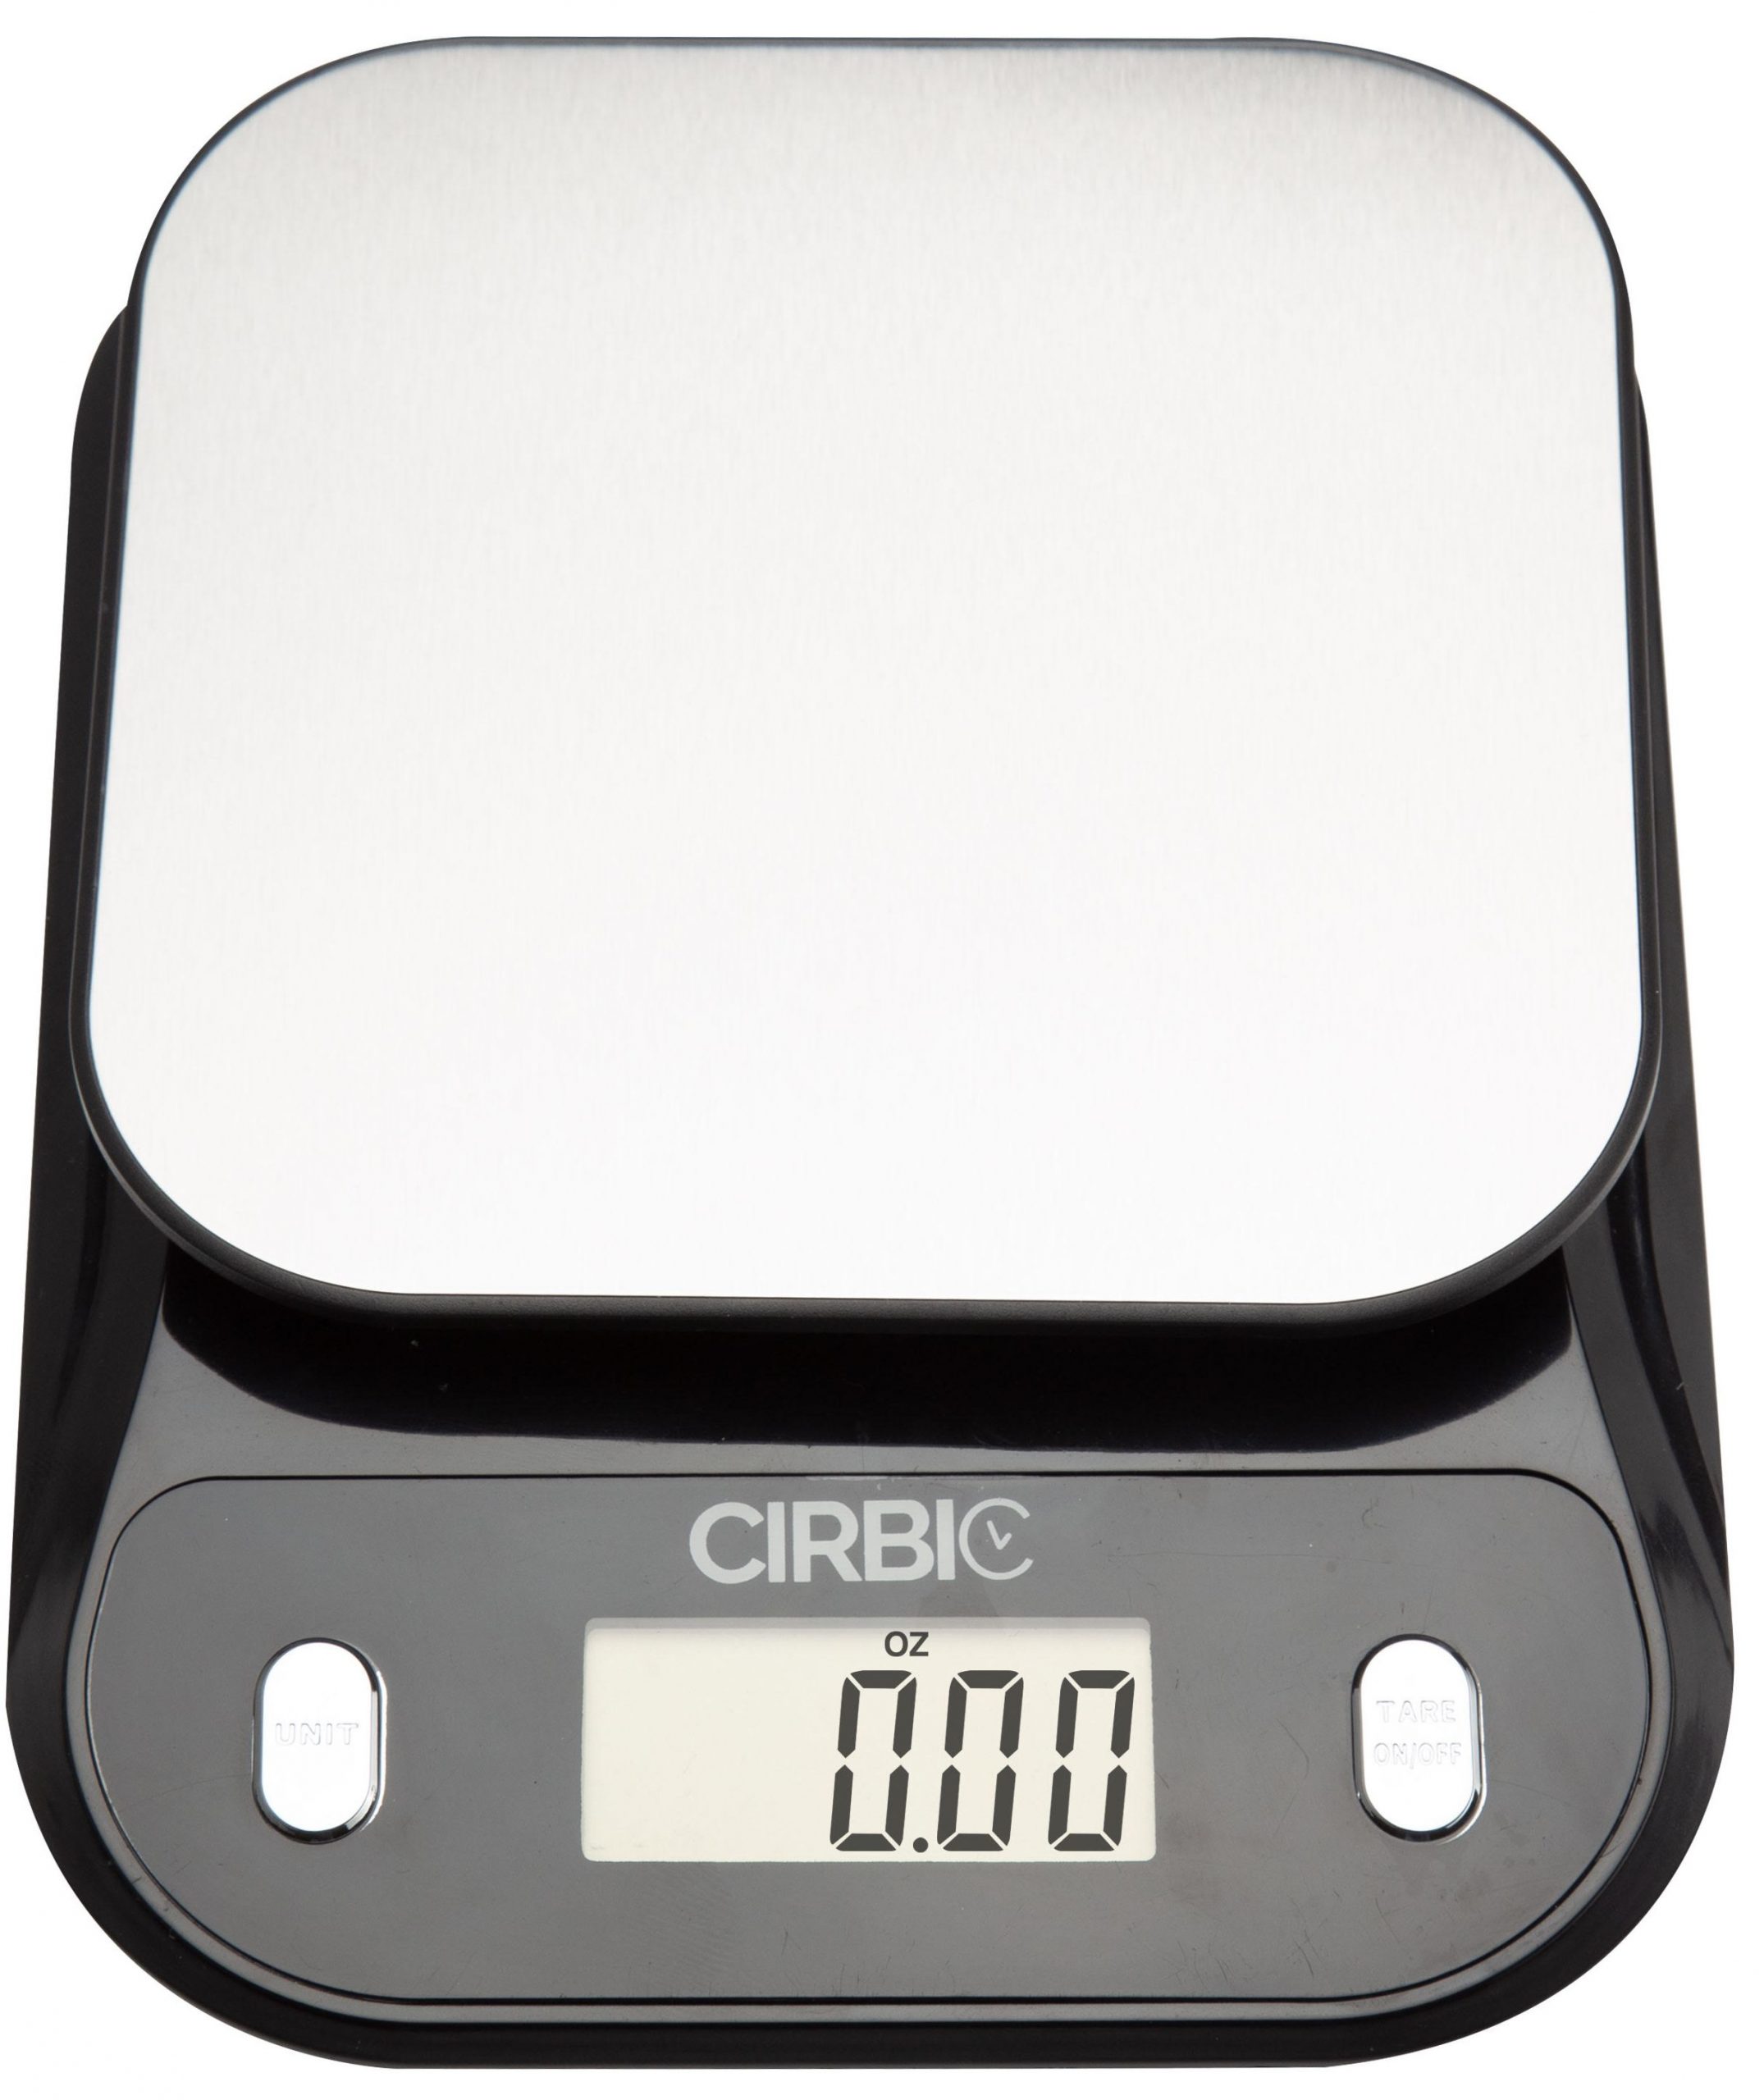 Talking Kitchen Scales – Big Numbers with Clear Loud Voice North